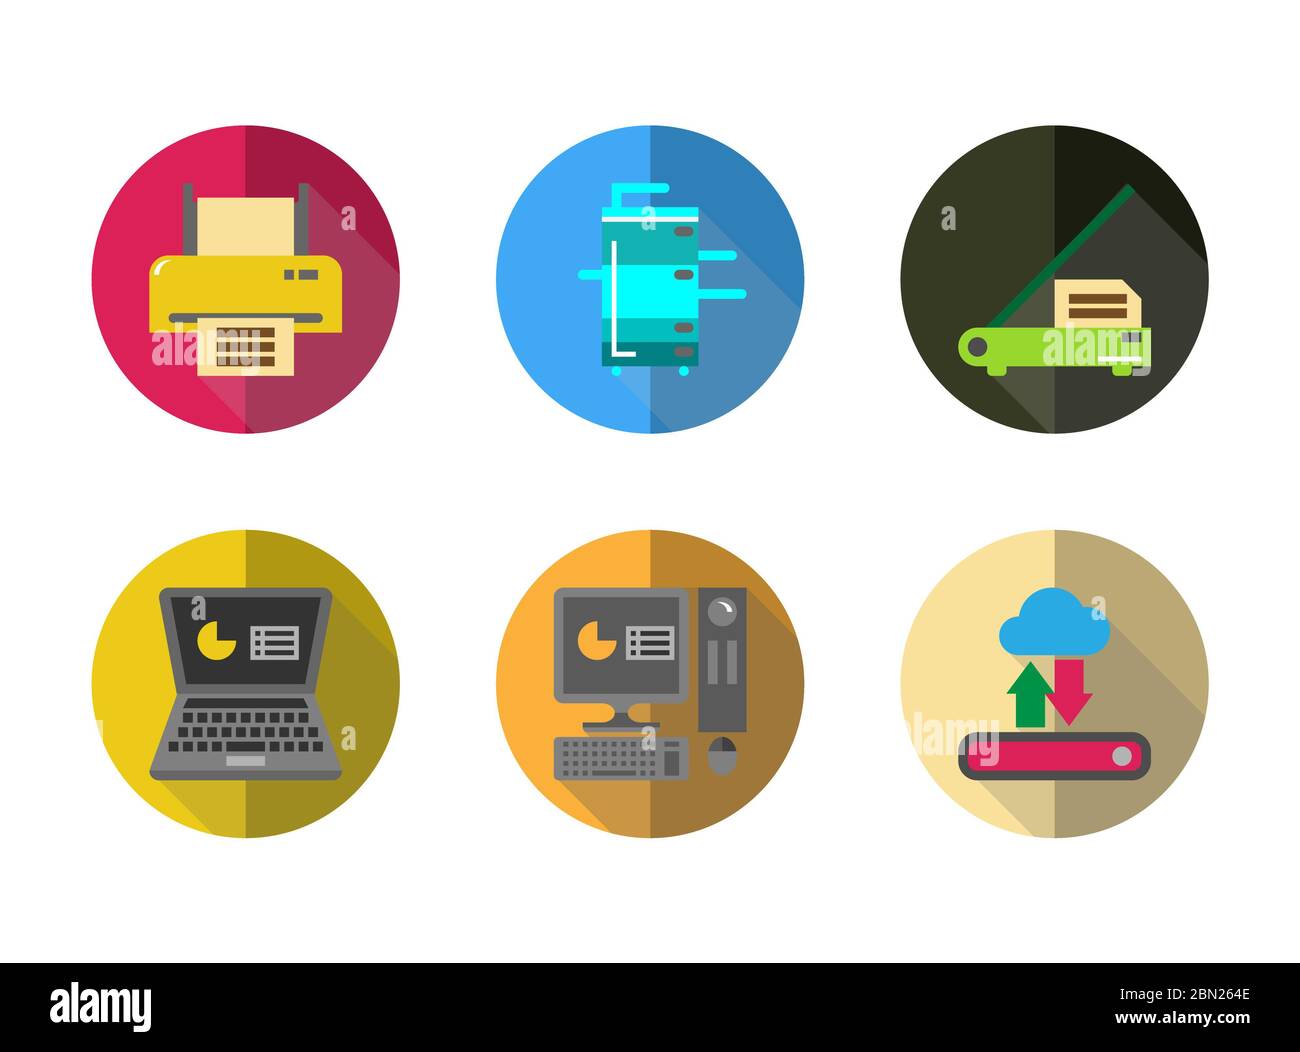 Icon set electronic office machine equipment for remote  working,laptop,desktop PC, scanner,printer,External harddisk with  cloud,copy machine Stock Photo - Alamy